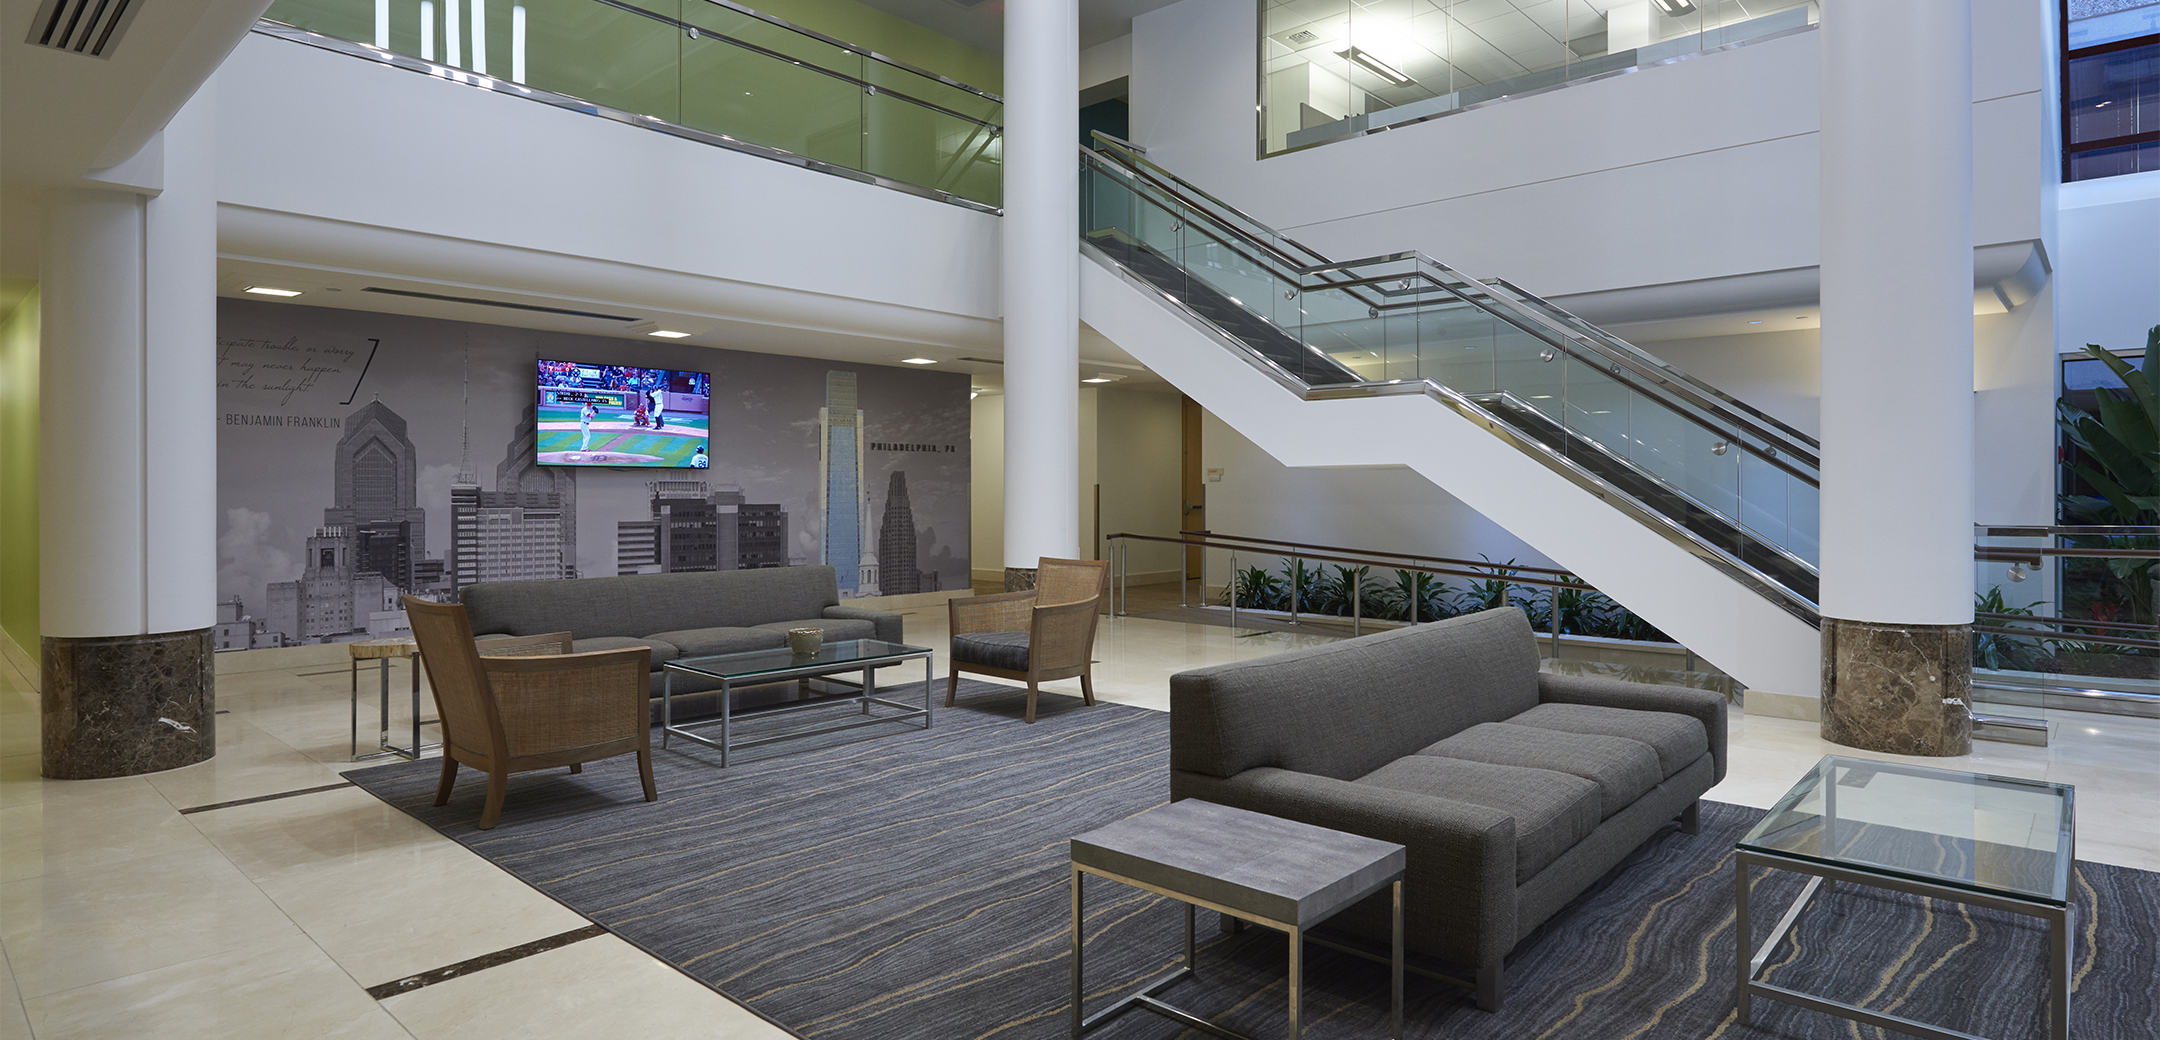 The empty lobby of Comcast Communications Spotlight with a long staircase connecting the two floors, a sitting area in the front, and Philadelphia skyline mural on the back wall.